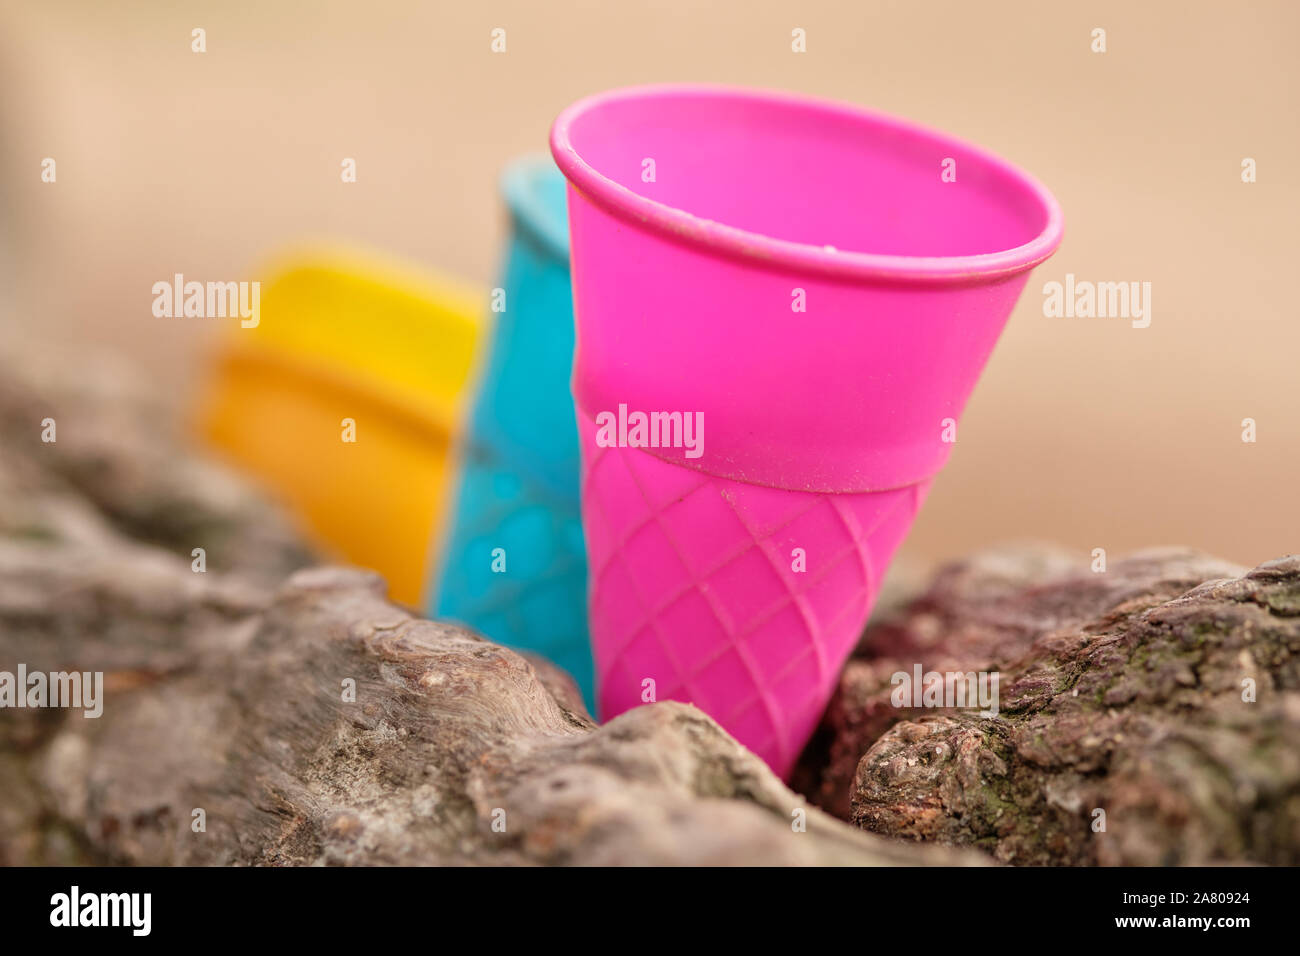 Some colorful outdoor play equipment in form of used plastic ice cream cone inserted between two branches of a tree. Seen in Germany in October. Stock Photo